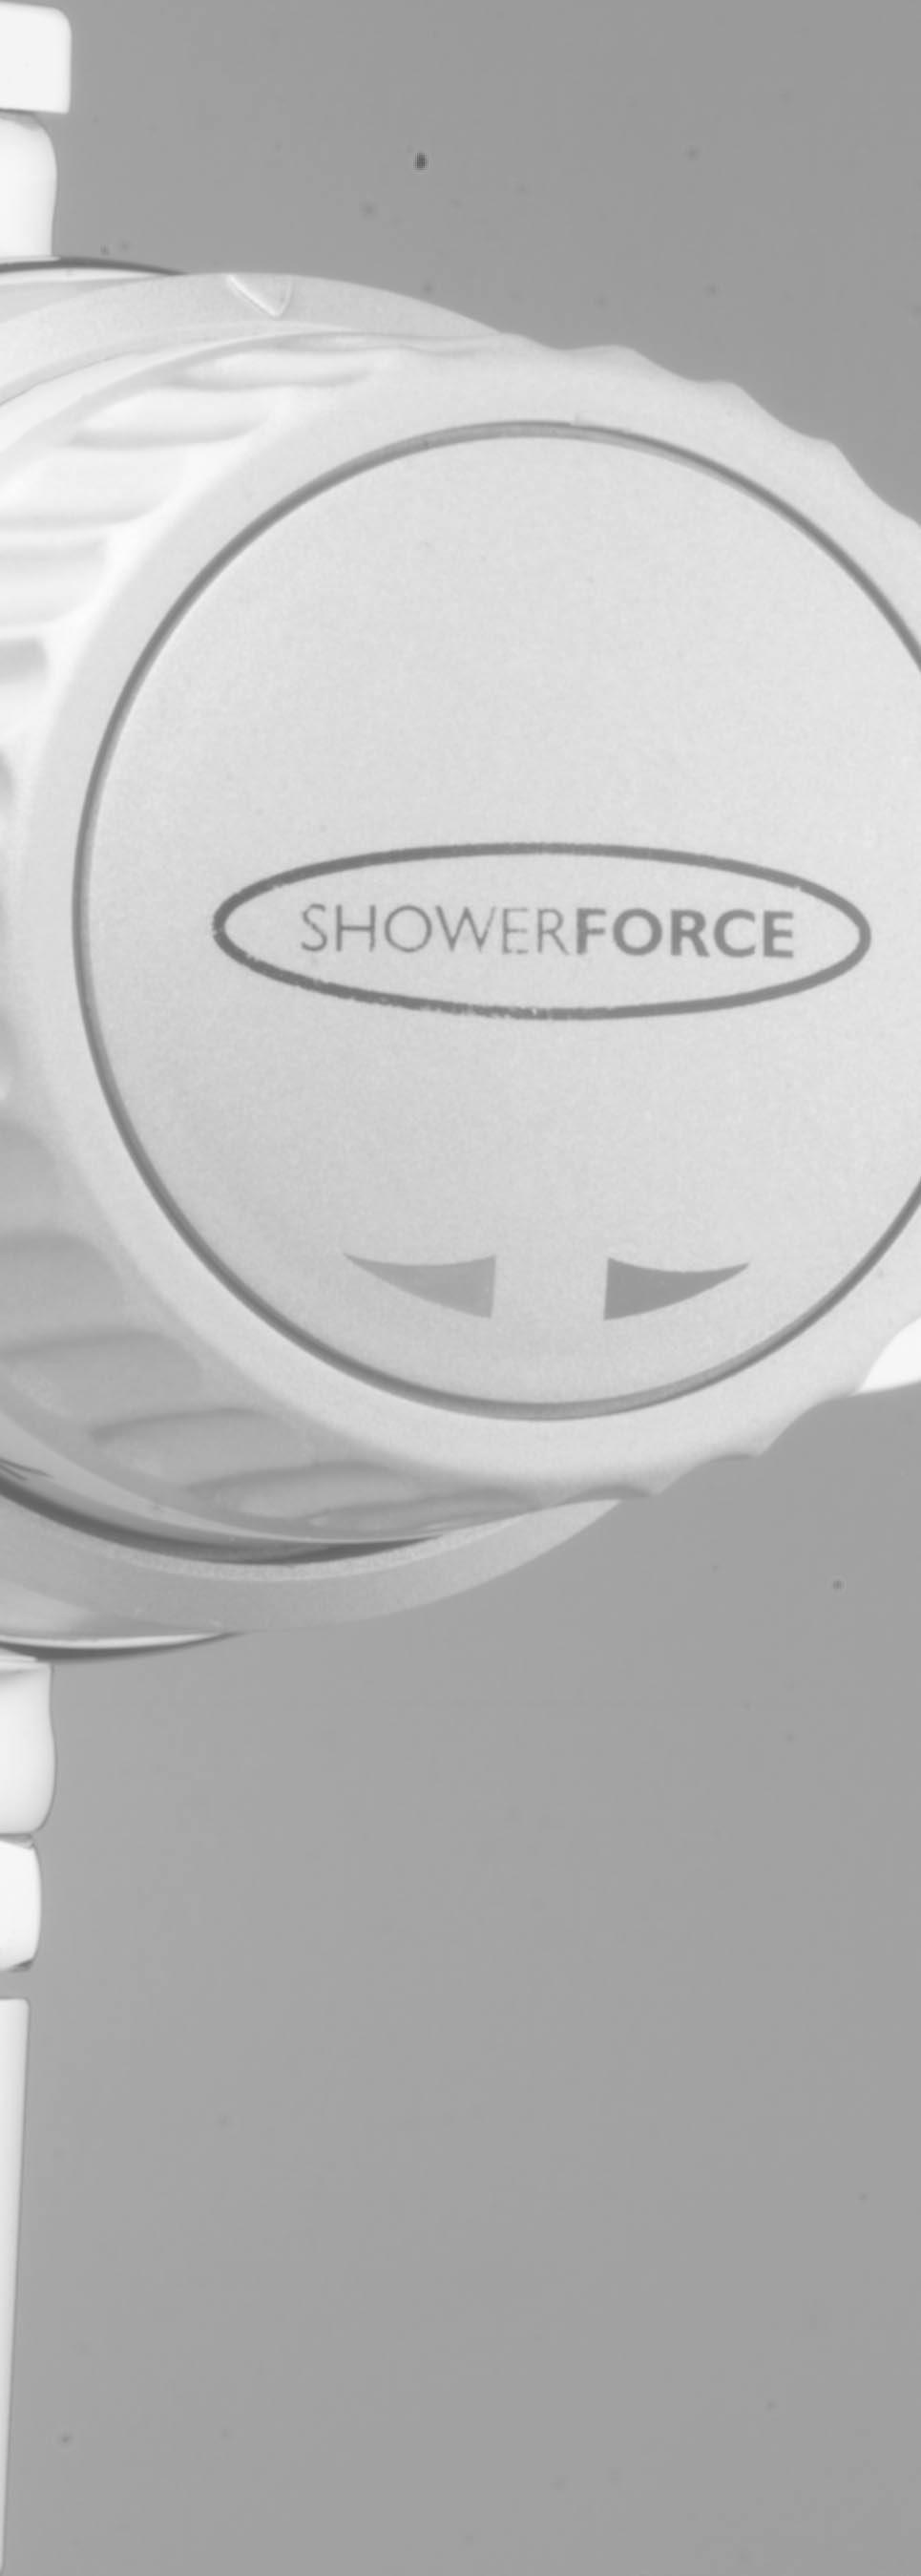 Contents Installation and Operating Instructions for ShowerForce Thermostatic Mixer Shower 912-T Please read this booklet carefully and ensure a competent person undertakes the installation.